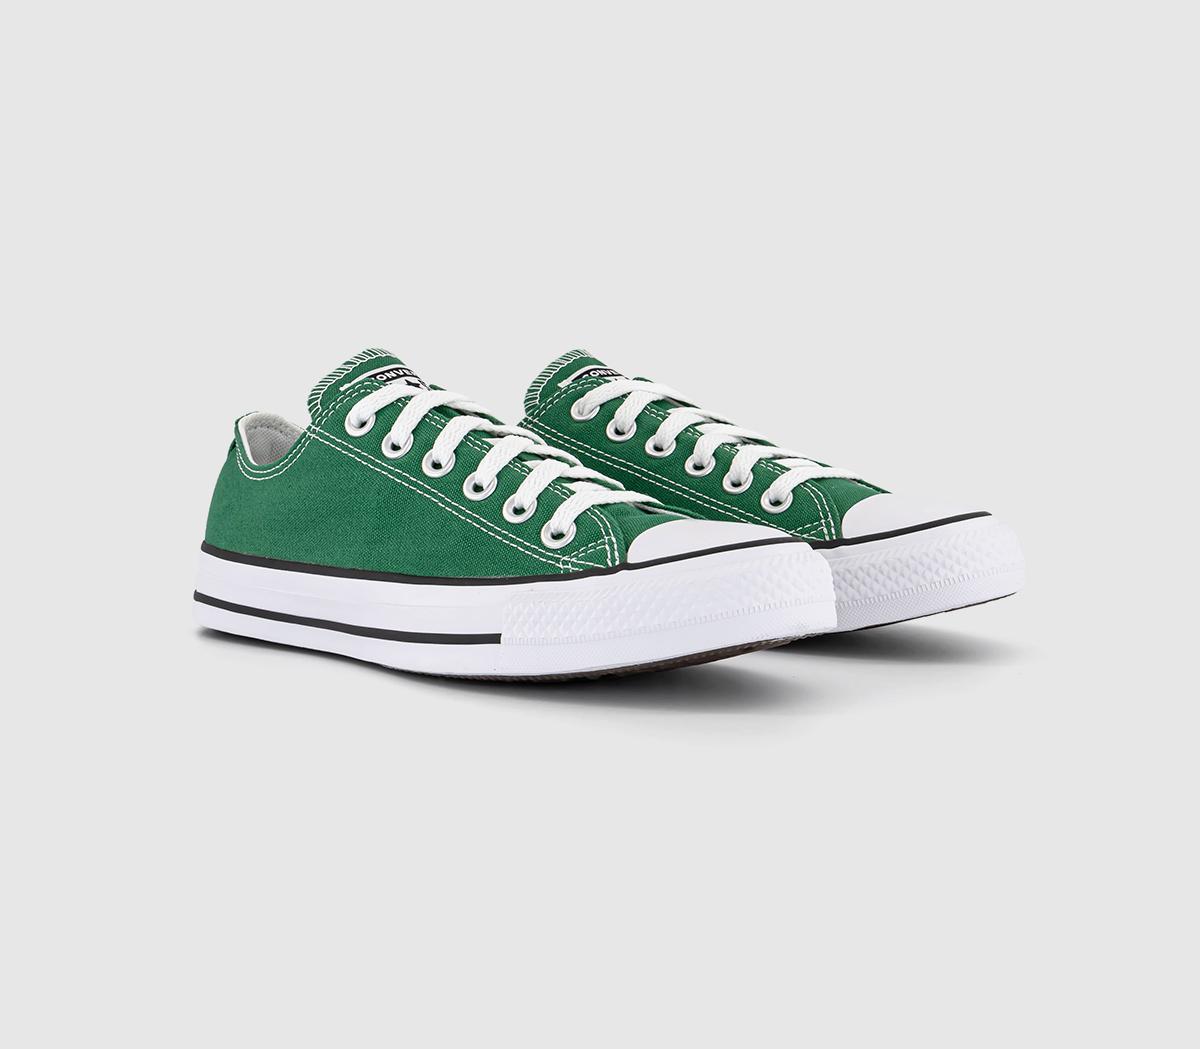 Converse All Star Low Trainers Amazon Green, 4.5